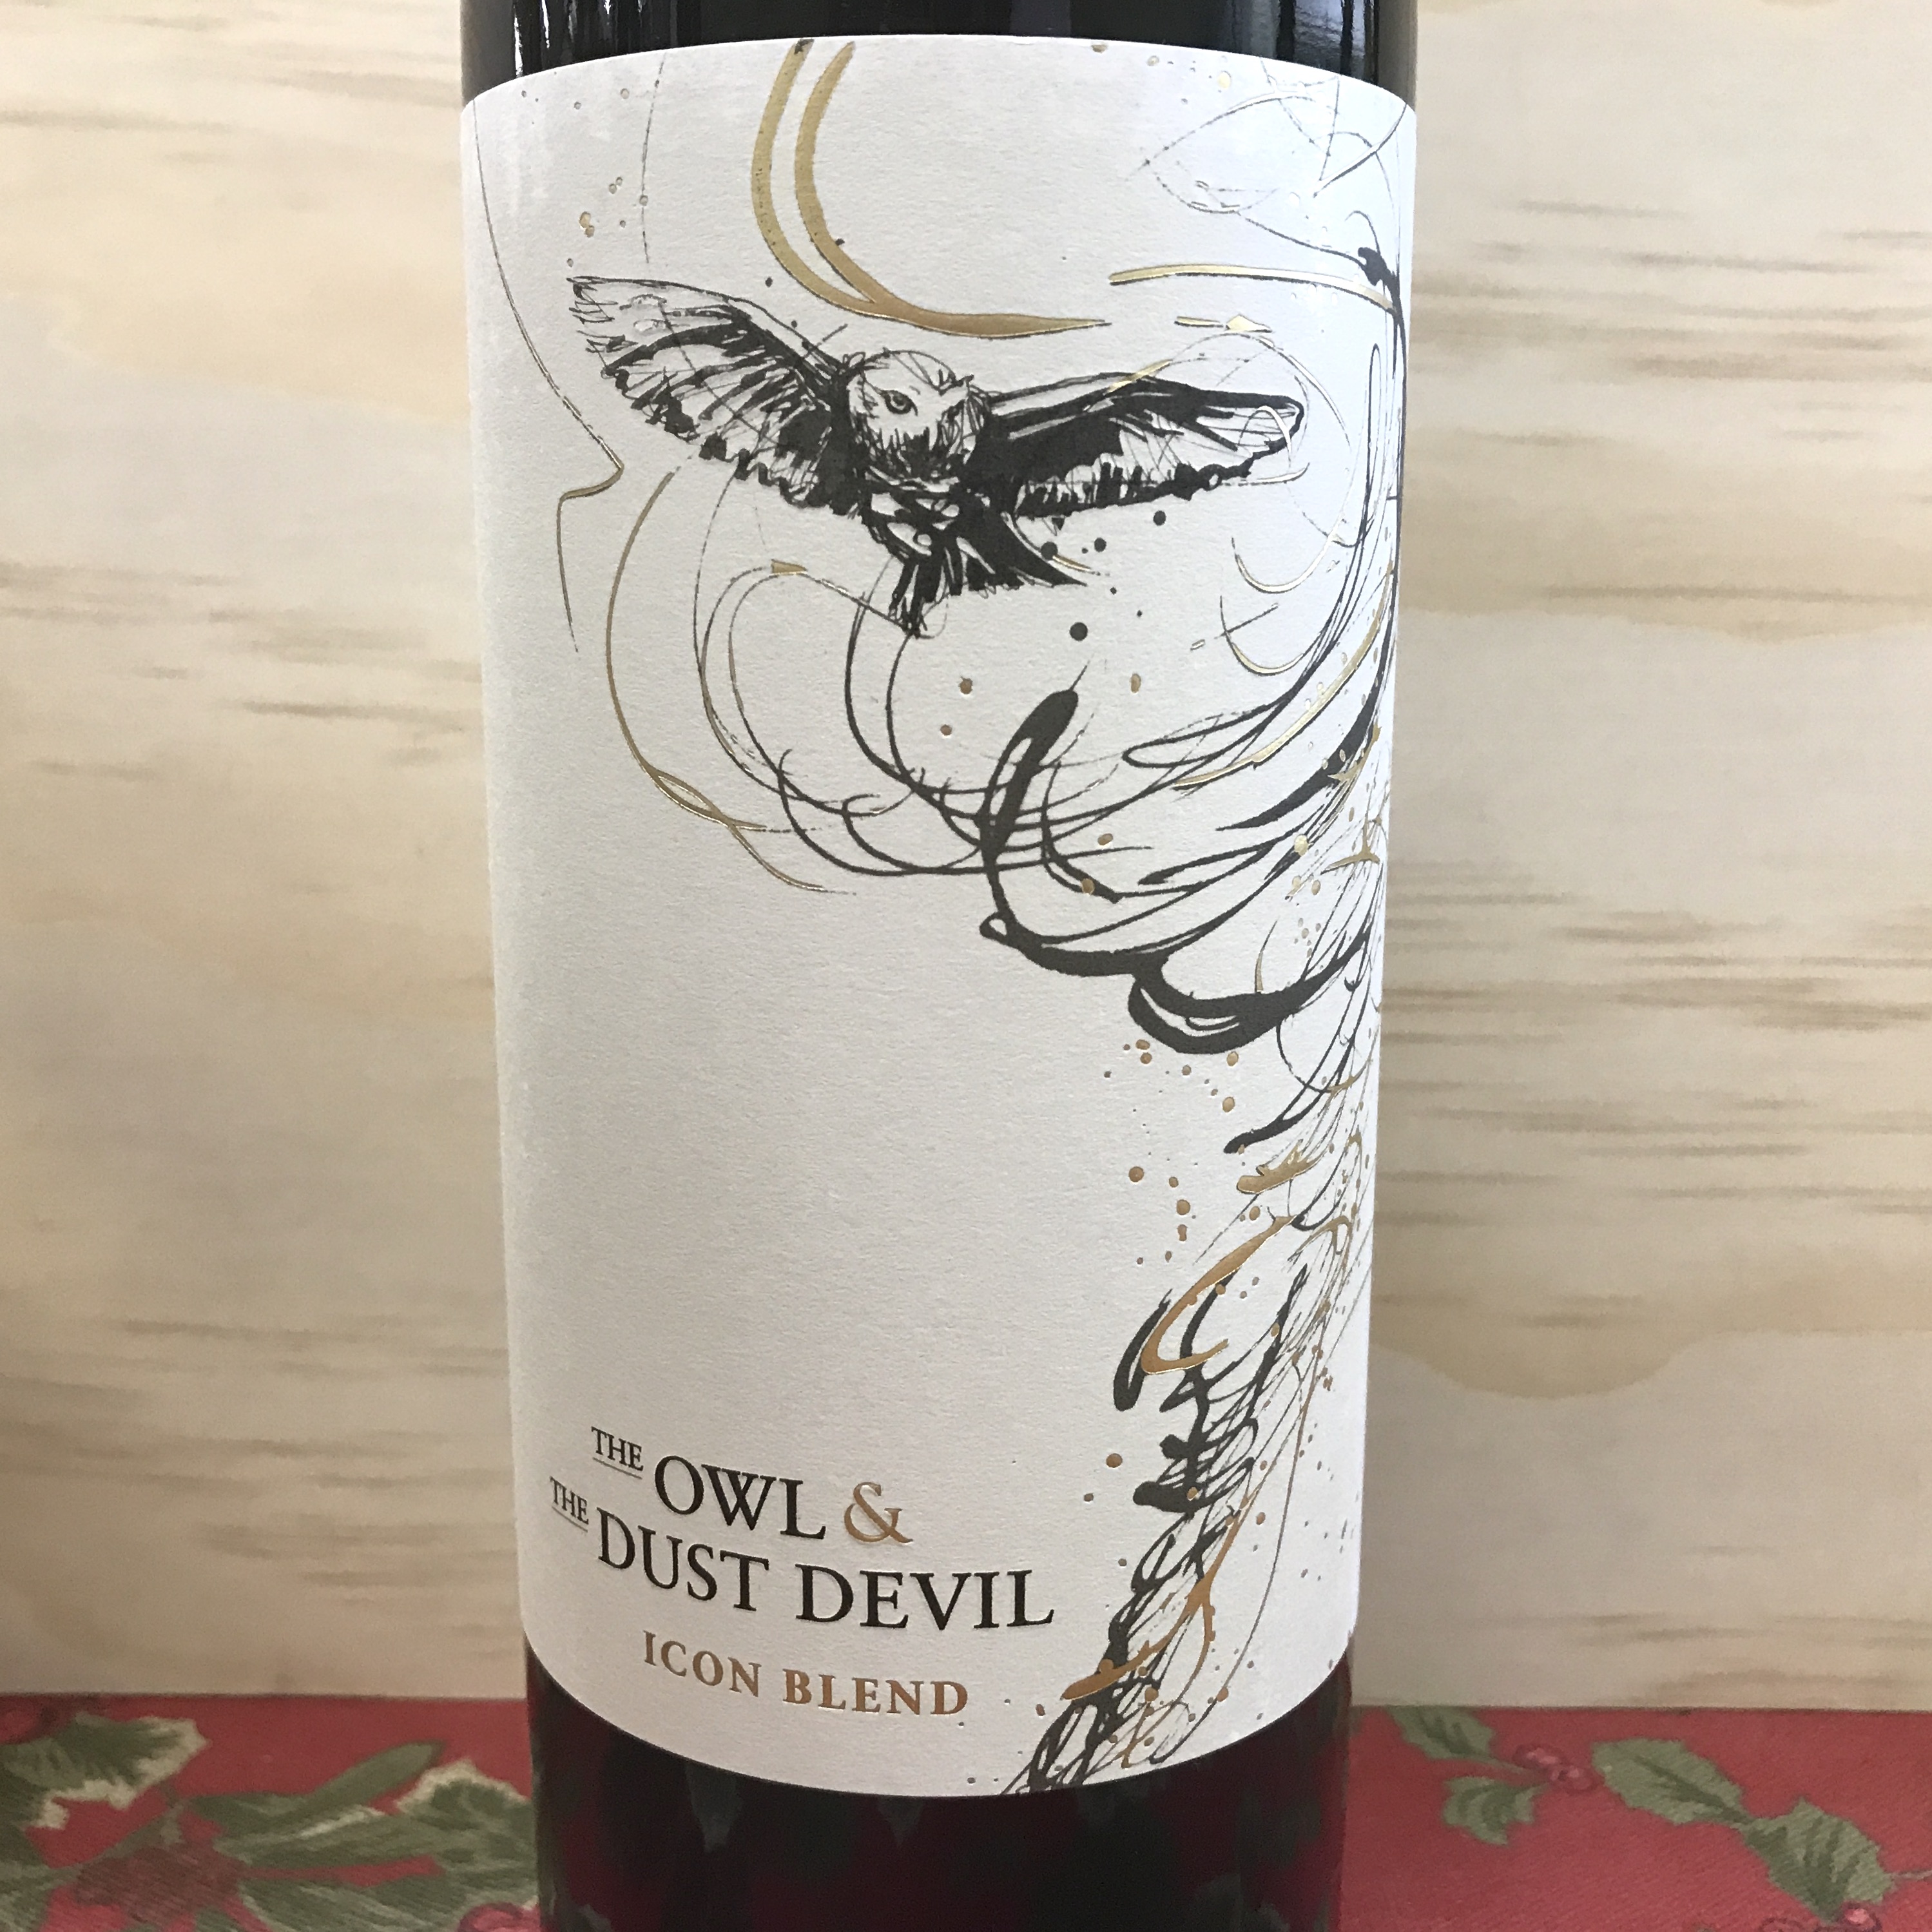 Finca Decero the Owl and the Dust Devil Icon Blend 2015